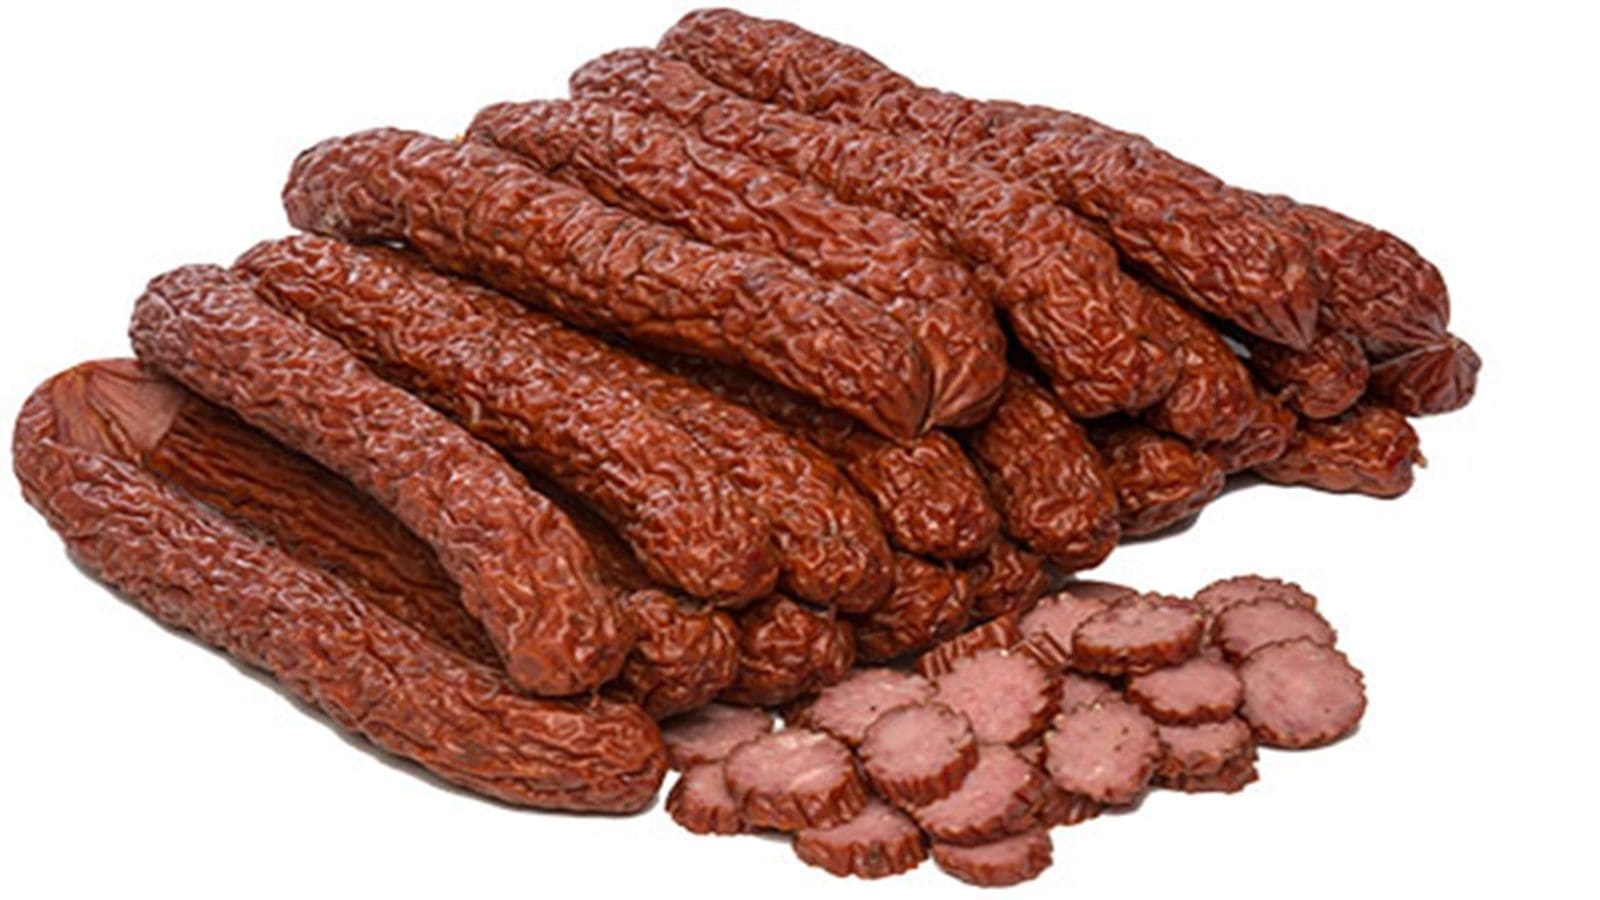 Study finds double contamination on 2020 dried sausages Salmonella outbreak